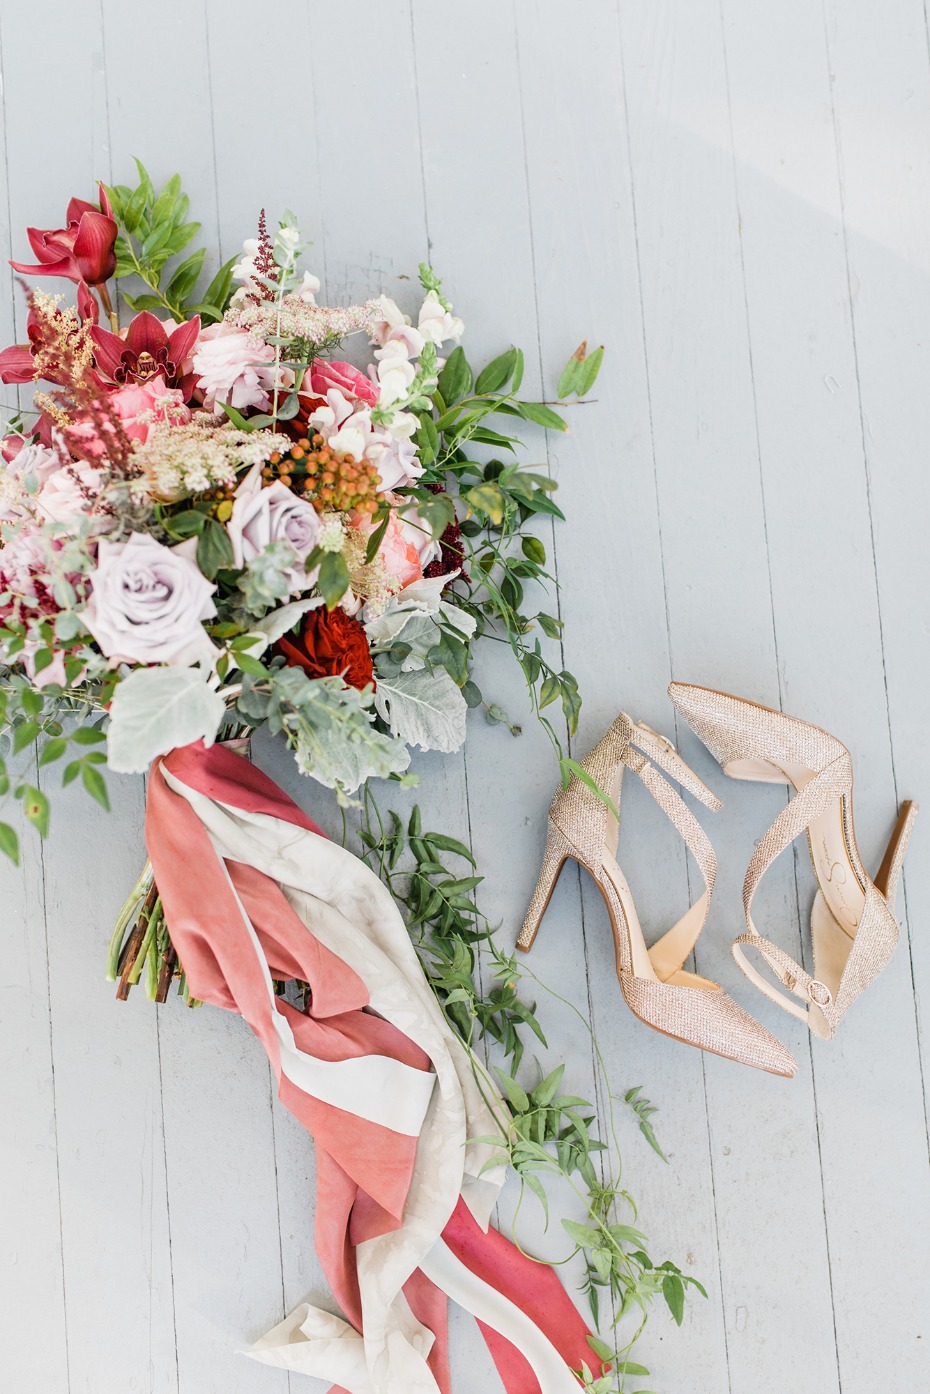 Flowers and shoes